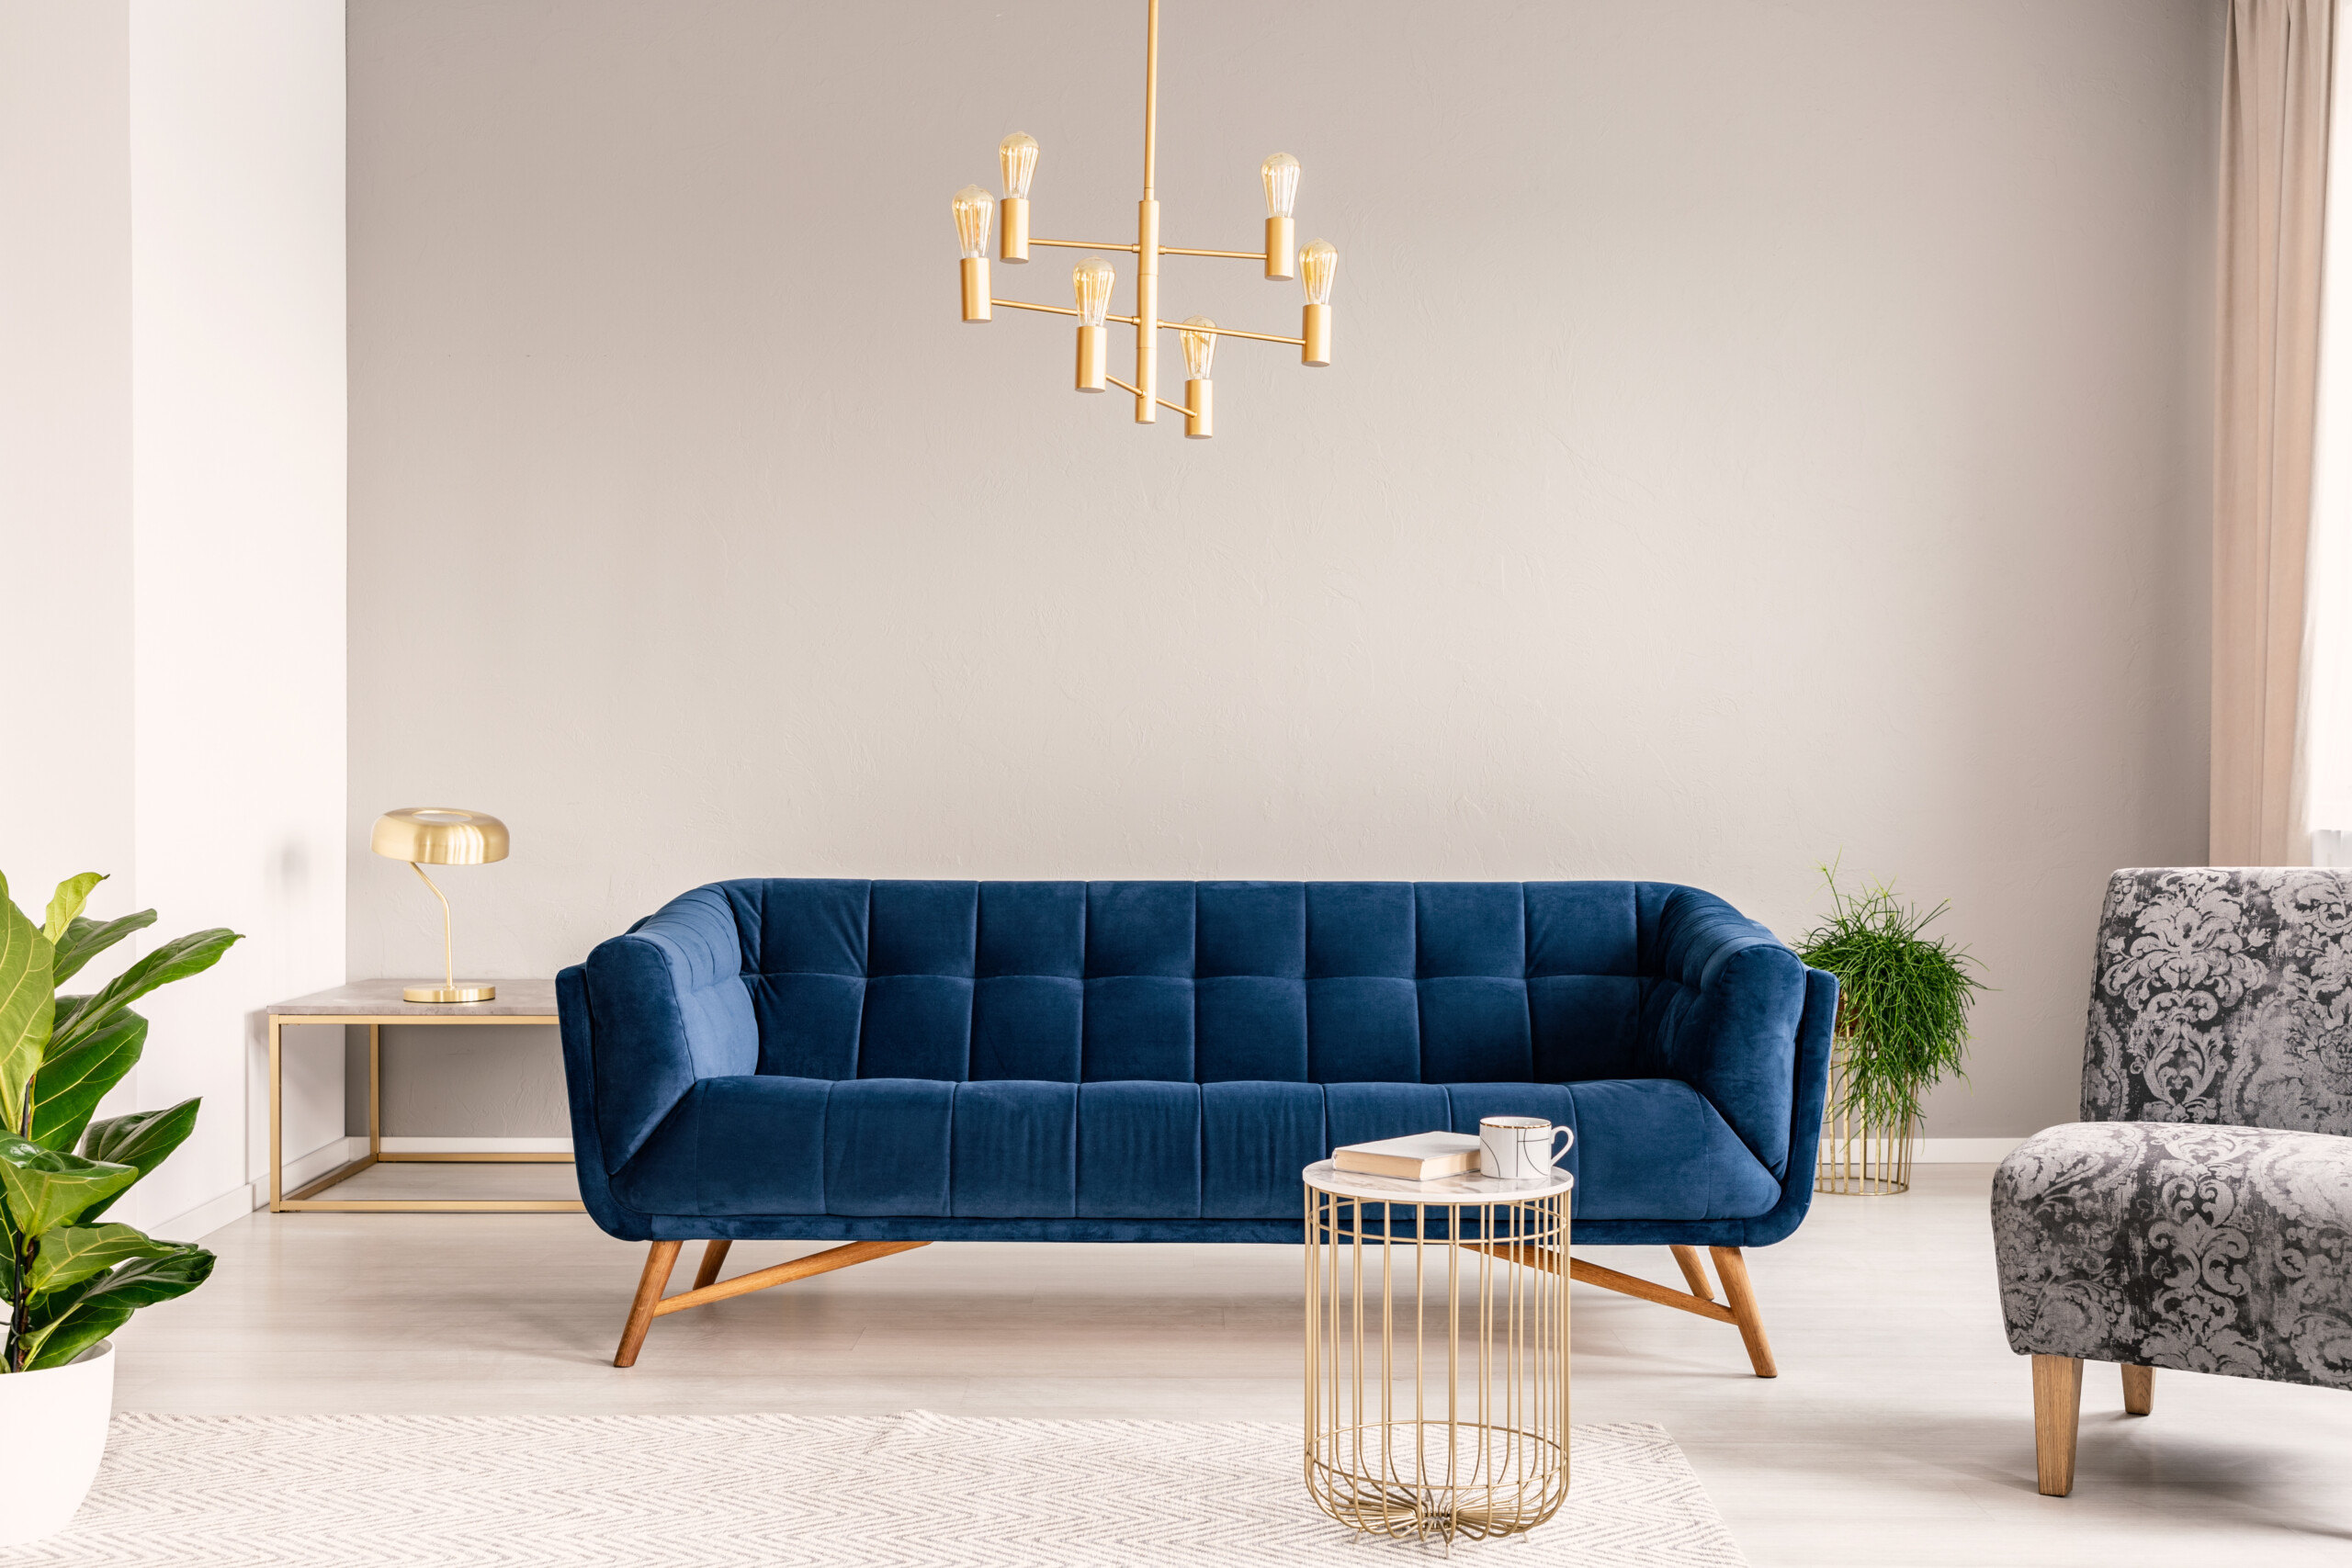 25 Best Sofa Trends In 2021 To Watch, Best Sofa Upholstery Designs